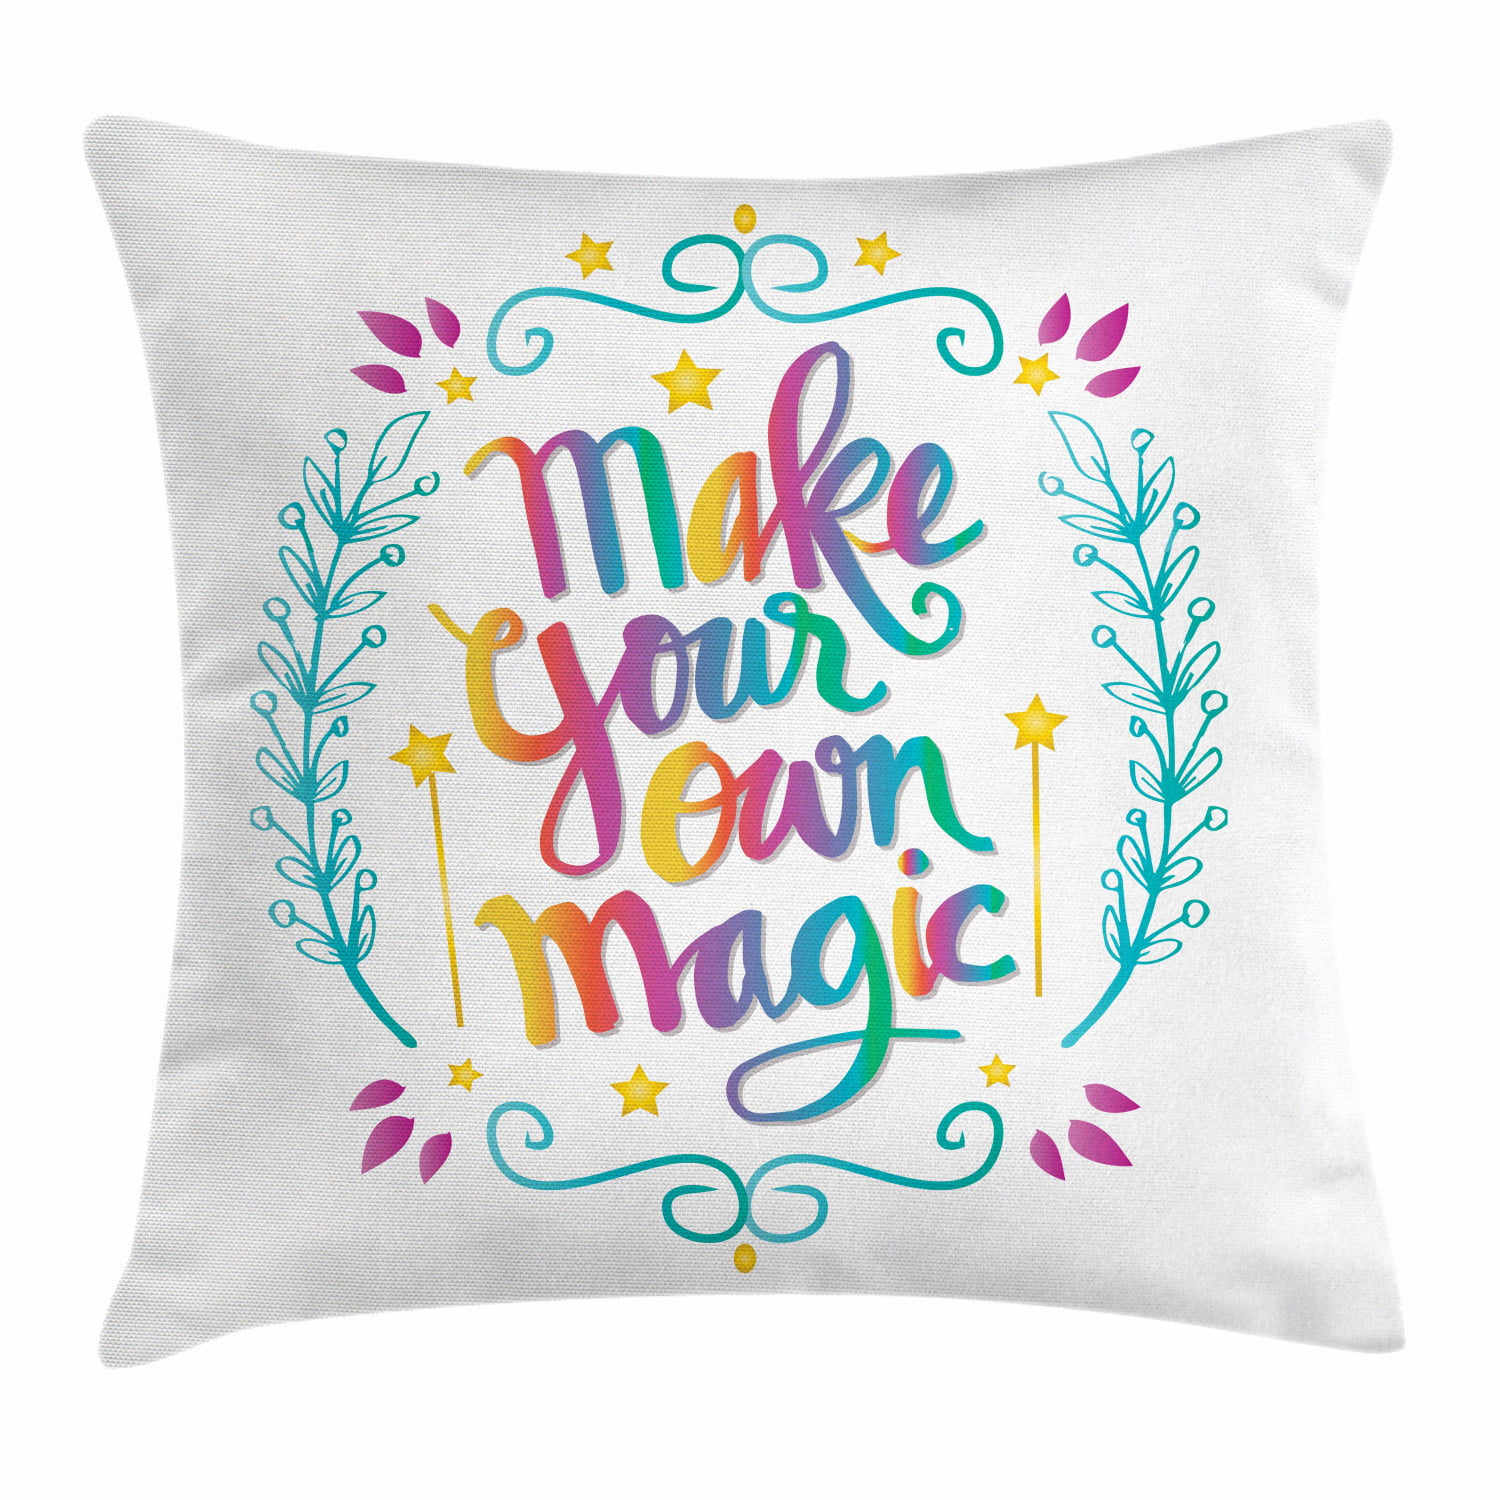 Magic Cushion Merchandise Merch 40 x 40 cm ADD Pillow Insert I Love You Aesthetic Flame Art Vintage Drawing Sequin Pillow Gift Throw Home Decor 